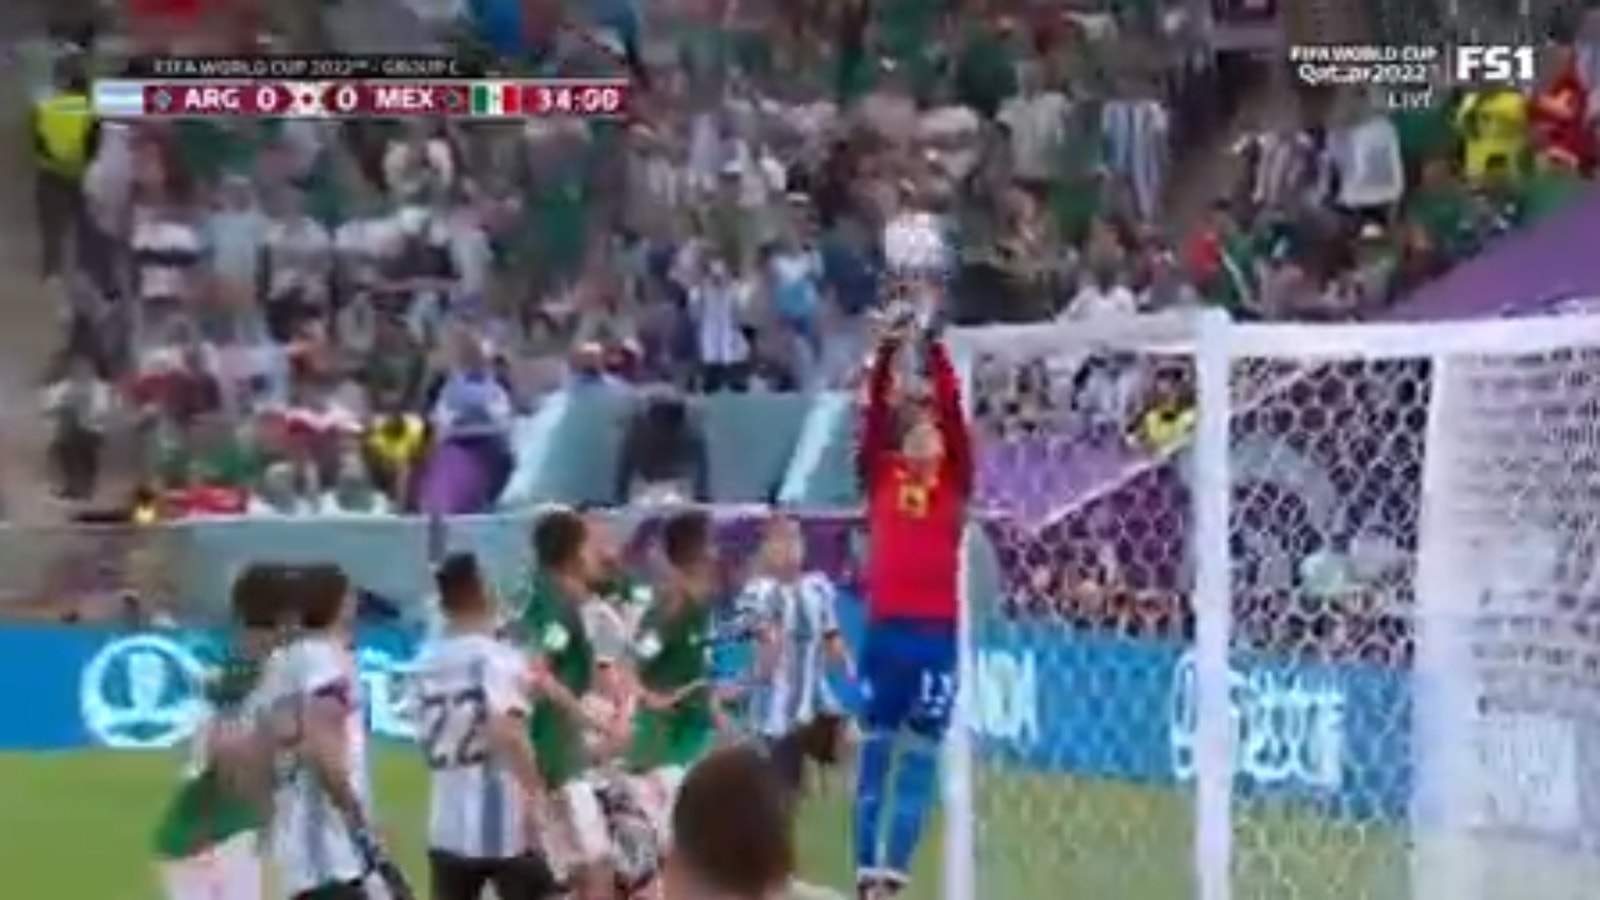 Argentina's Lionel Messi was on the verge of scoring his first goal of the tournament, Ochoa hit him